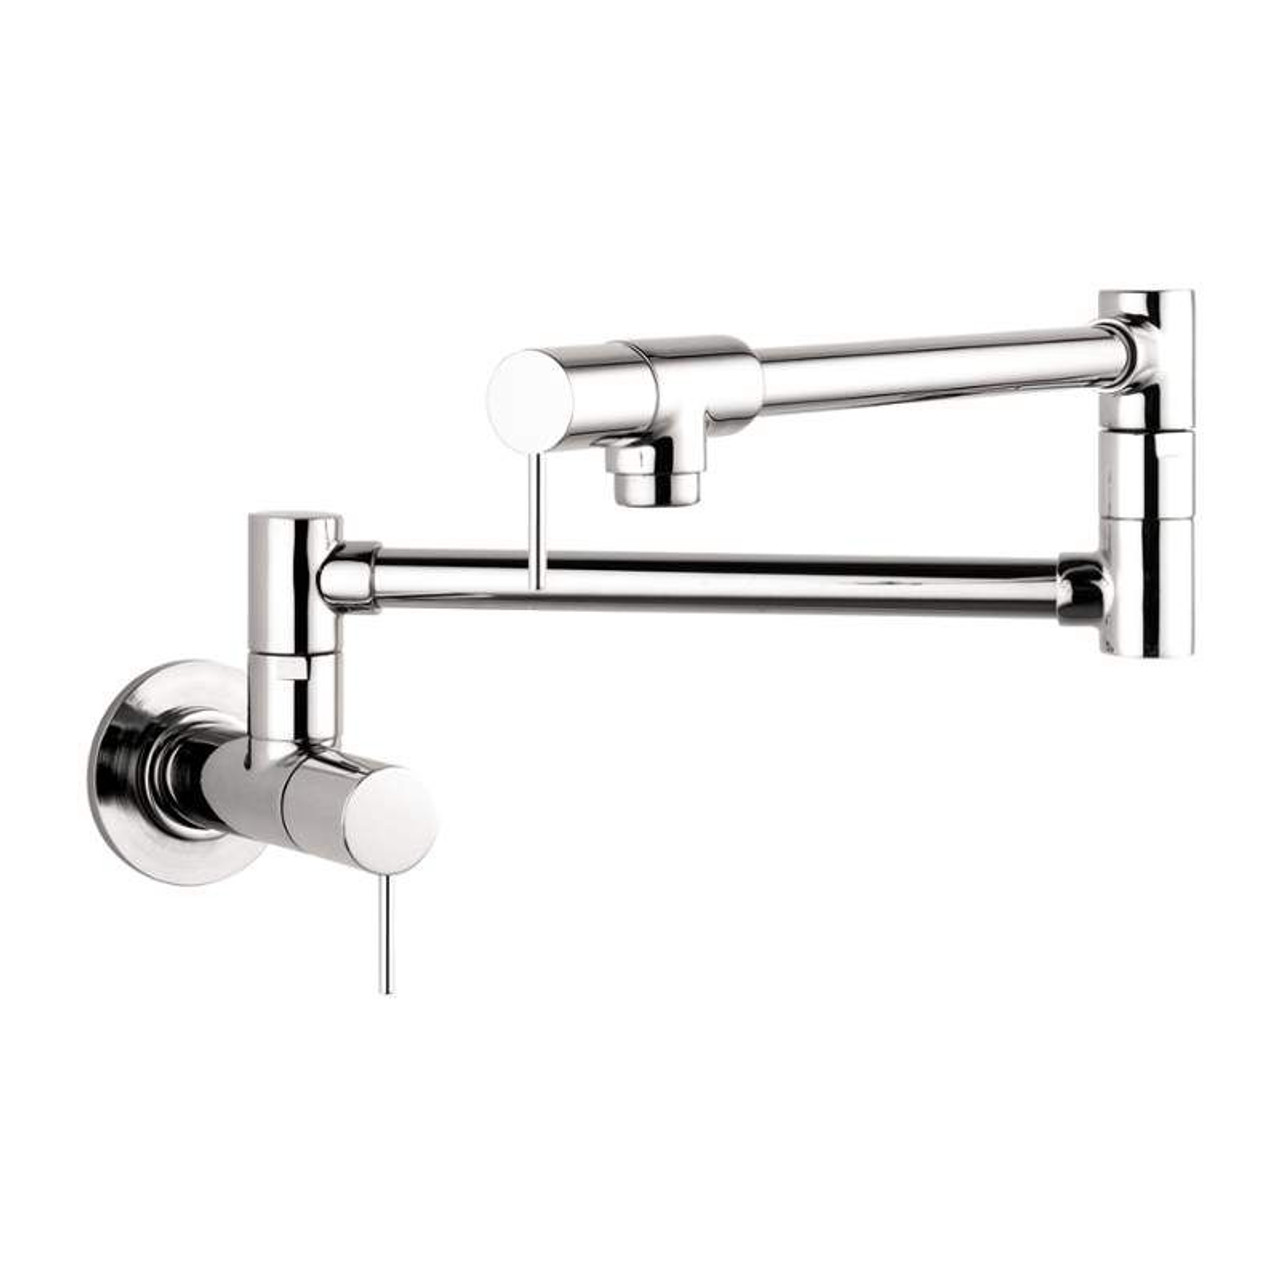 Axor Starck Wall-Mounted Double-Jointed Pot Filler in Chrome 010859001  Online